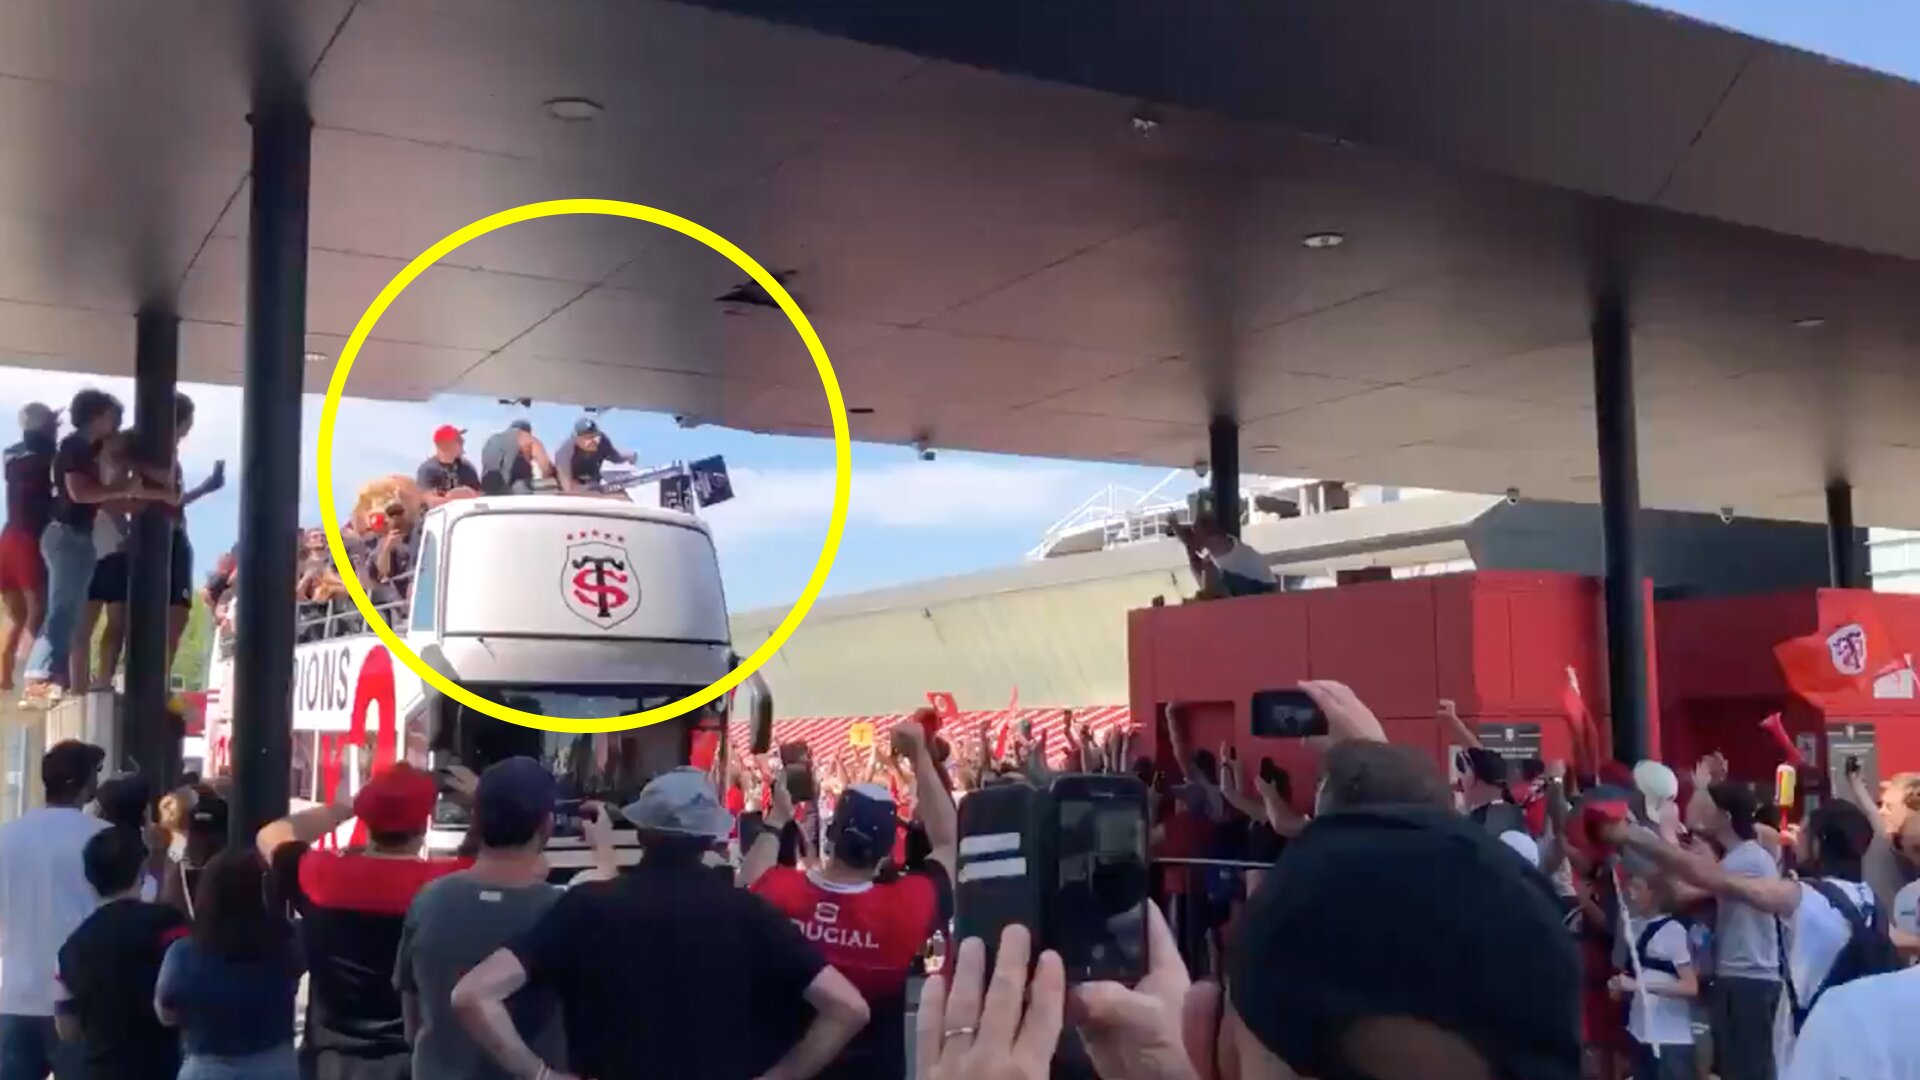 Toulouse rugby team yeeted by bridge during Top 14 celebrations